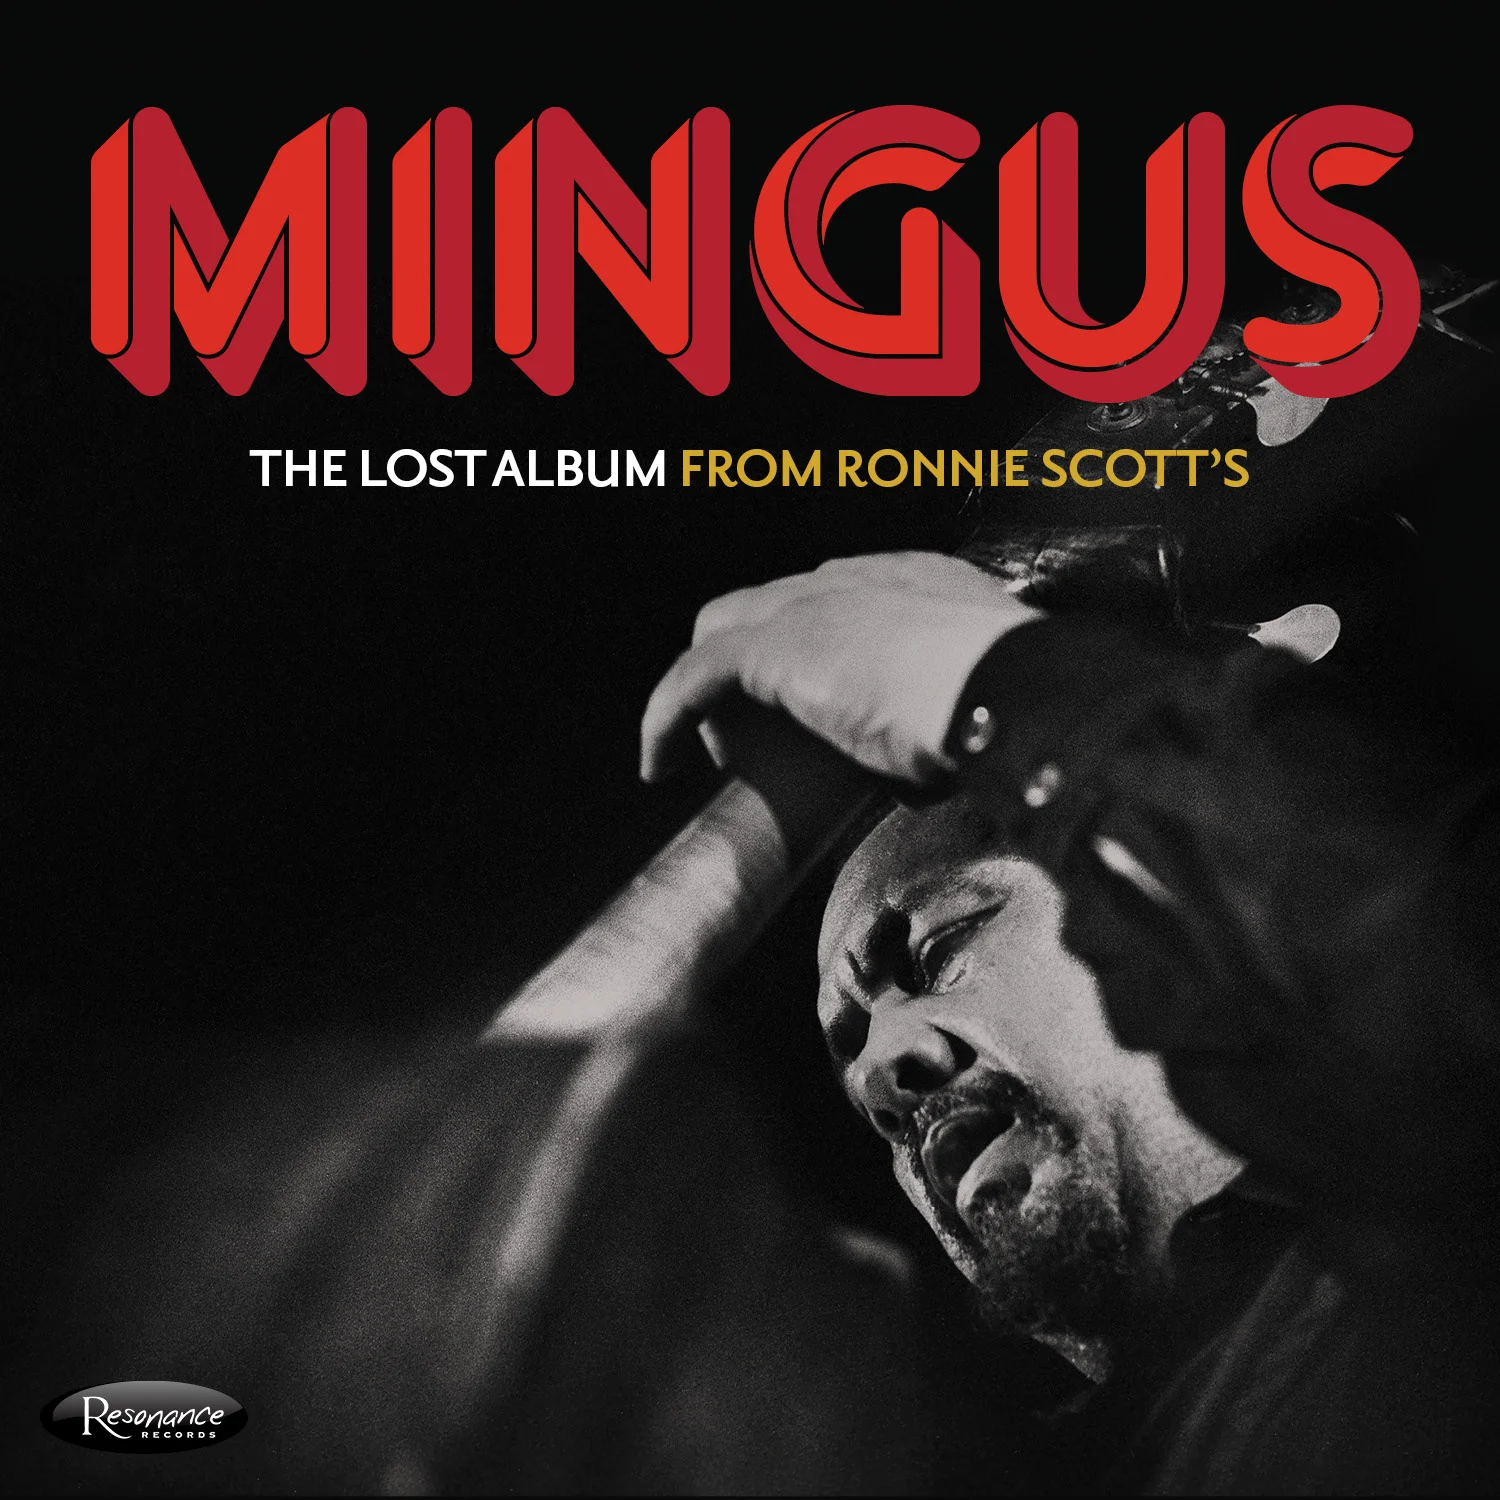 The Lost Album from Ronnie Scotts